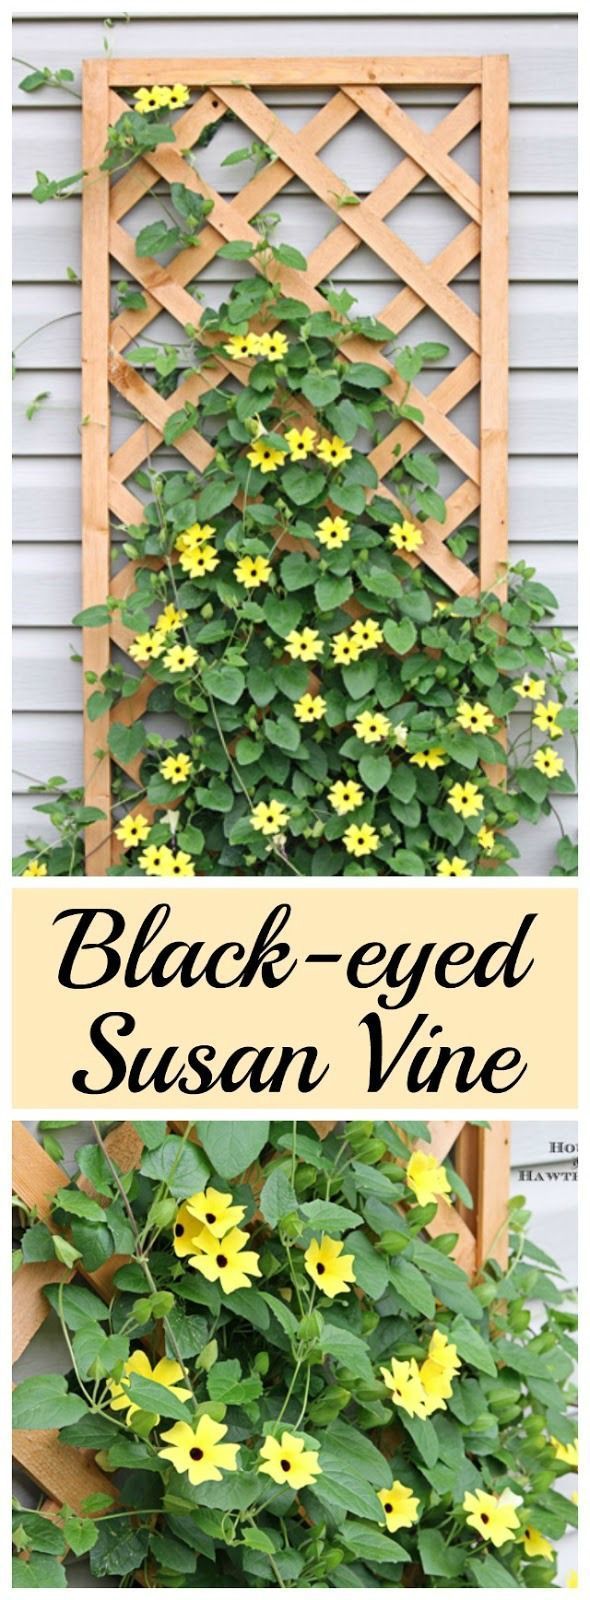 Black-eyed Susan vine - you must plant one of these in your garden this year - i...